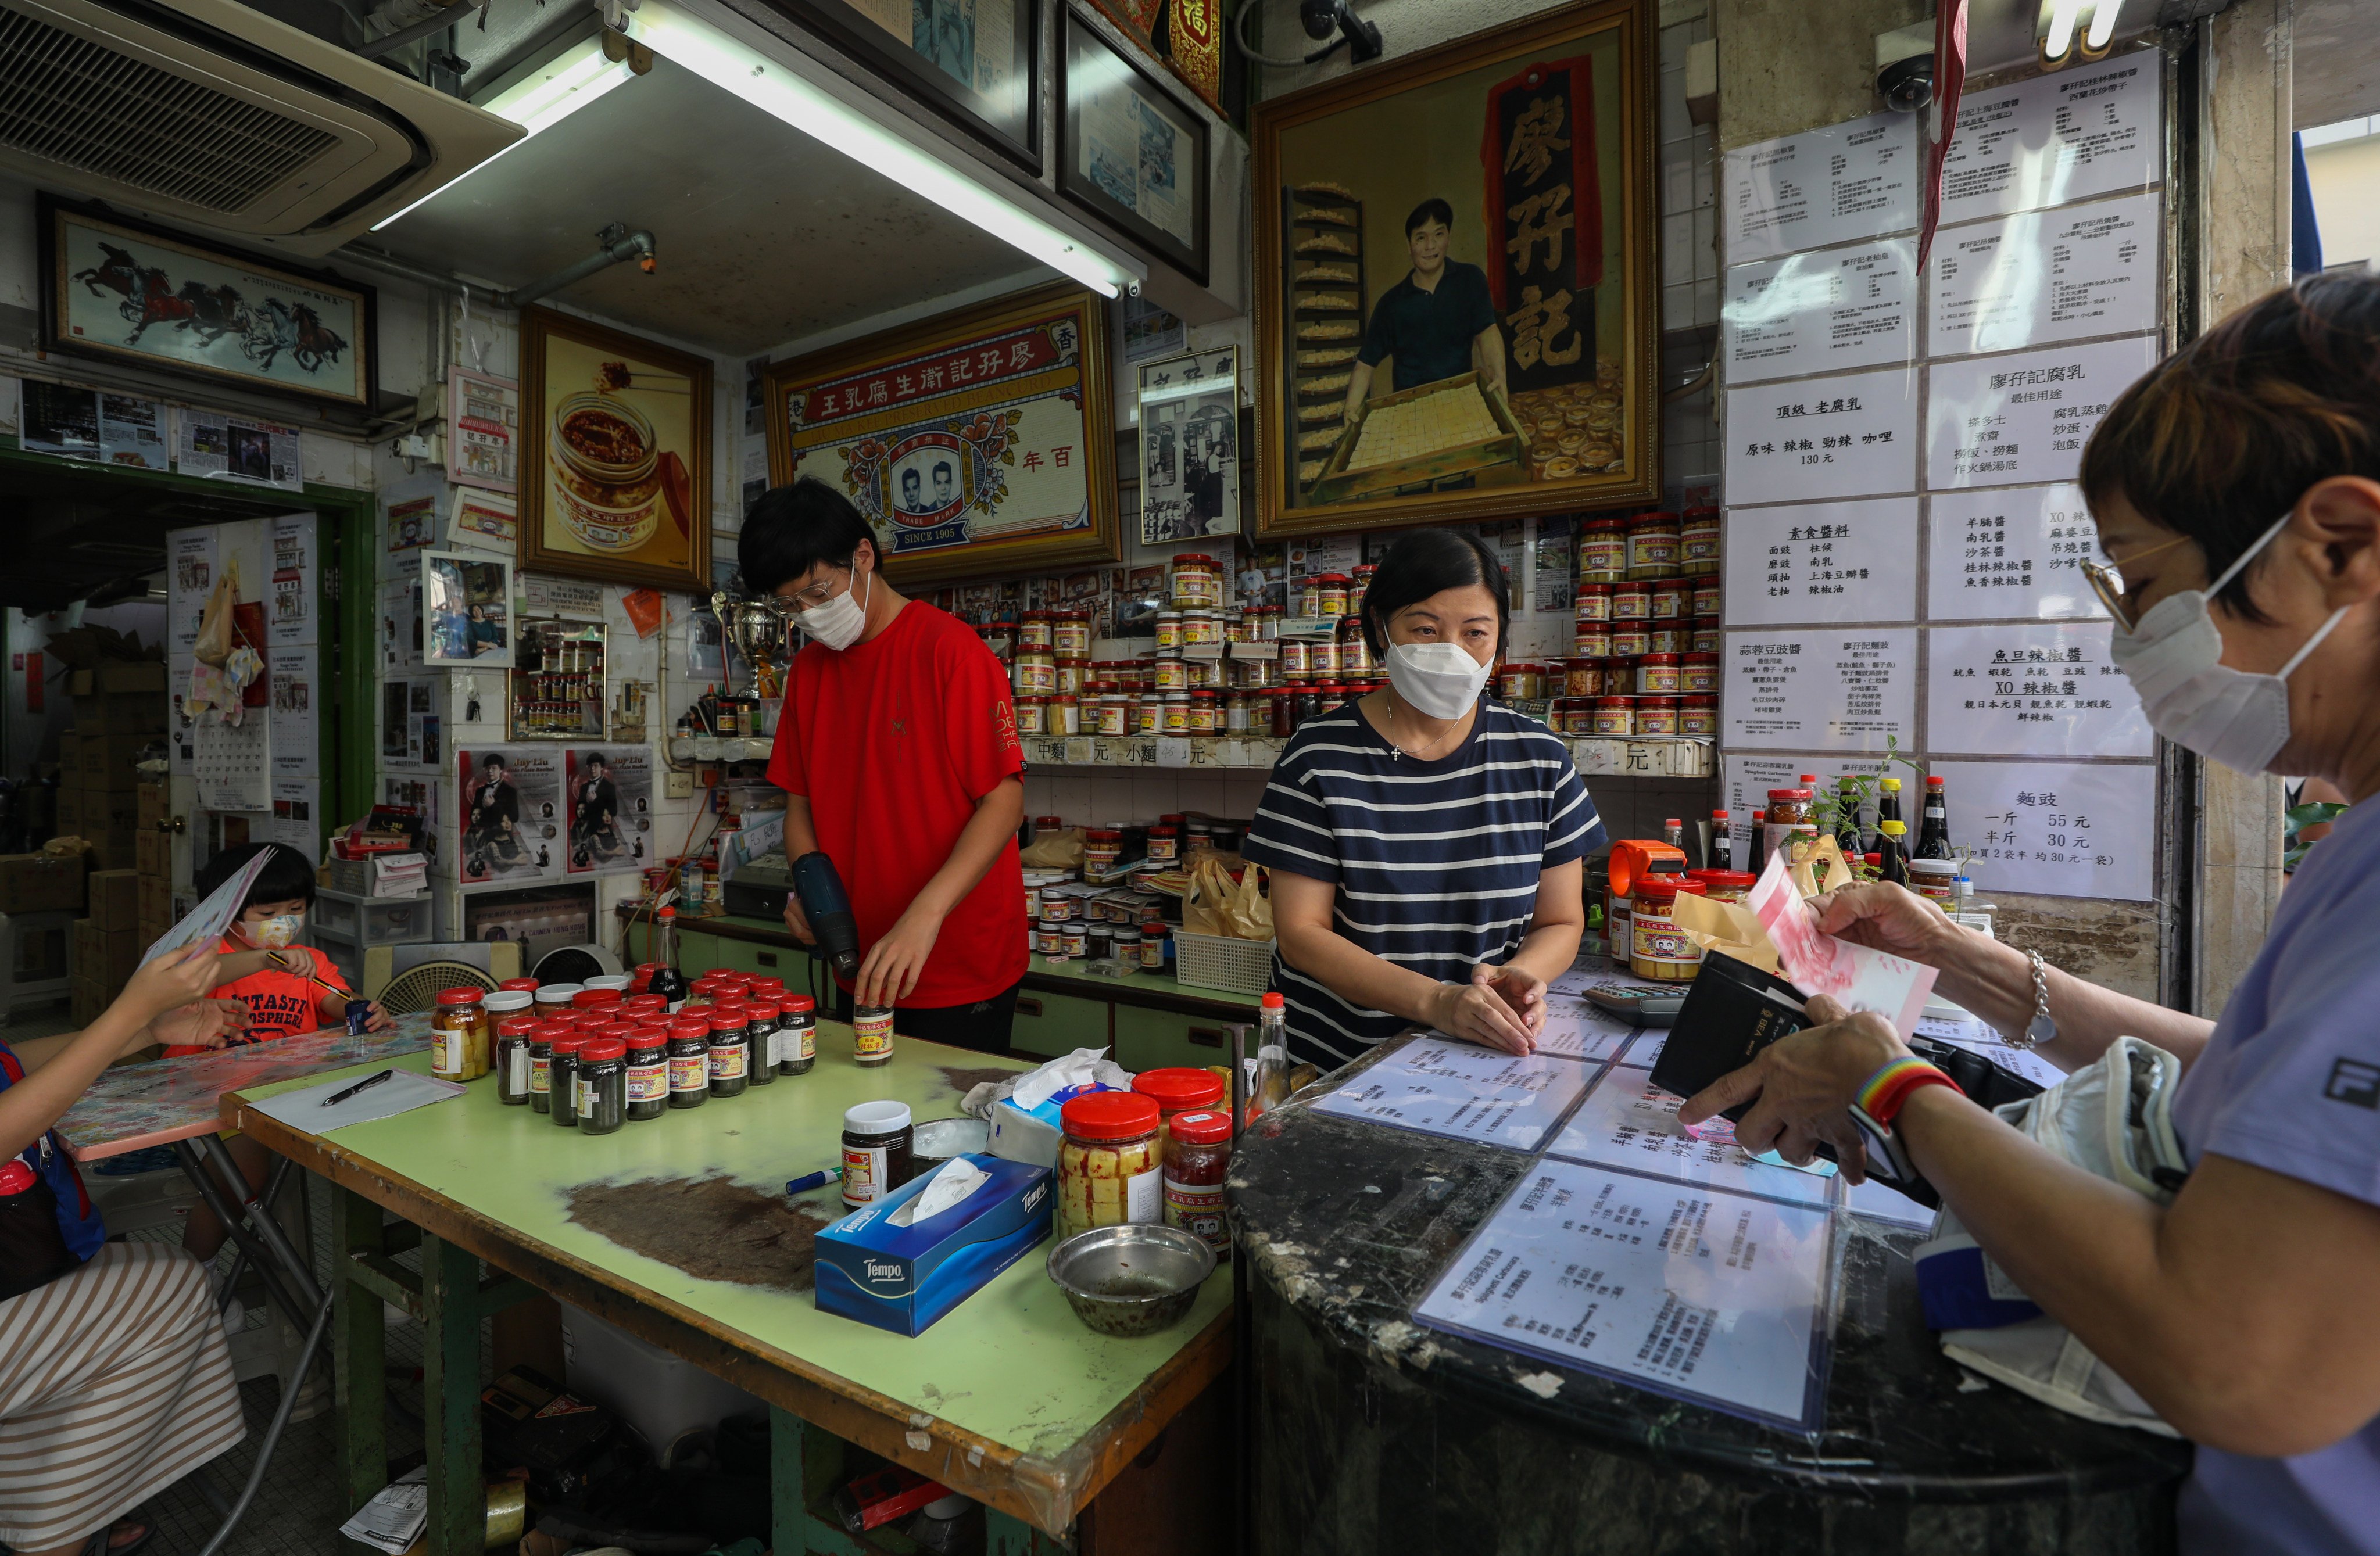 Jay Liu Fong-yip (left) is the fourth generation of his family to work at Liu Ma Kee, a fermented tofu shop founded in 1905 in Hong Kong’s Yau Ma Tei neighbourhood. Photo: Xiaomei Chen